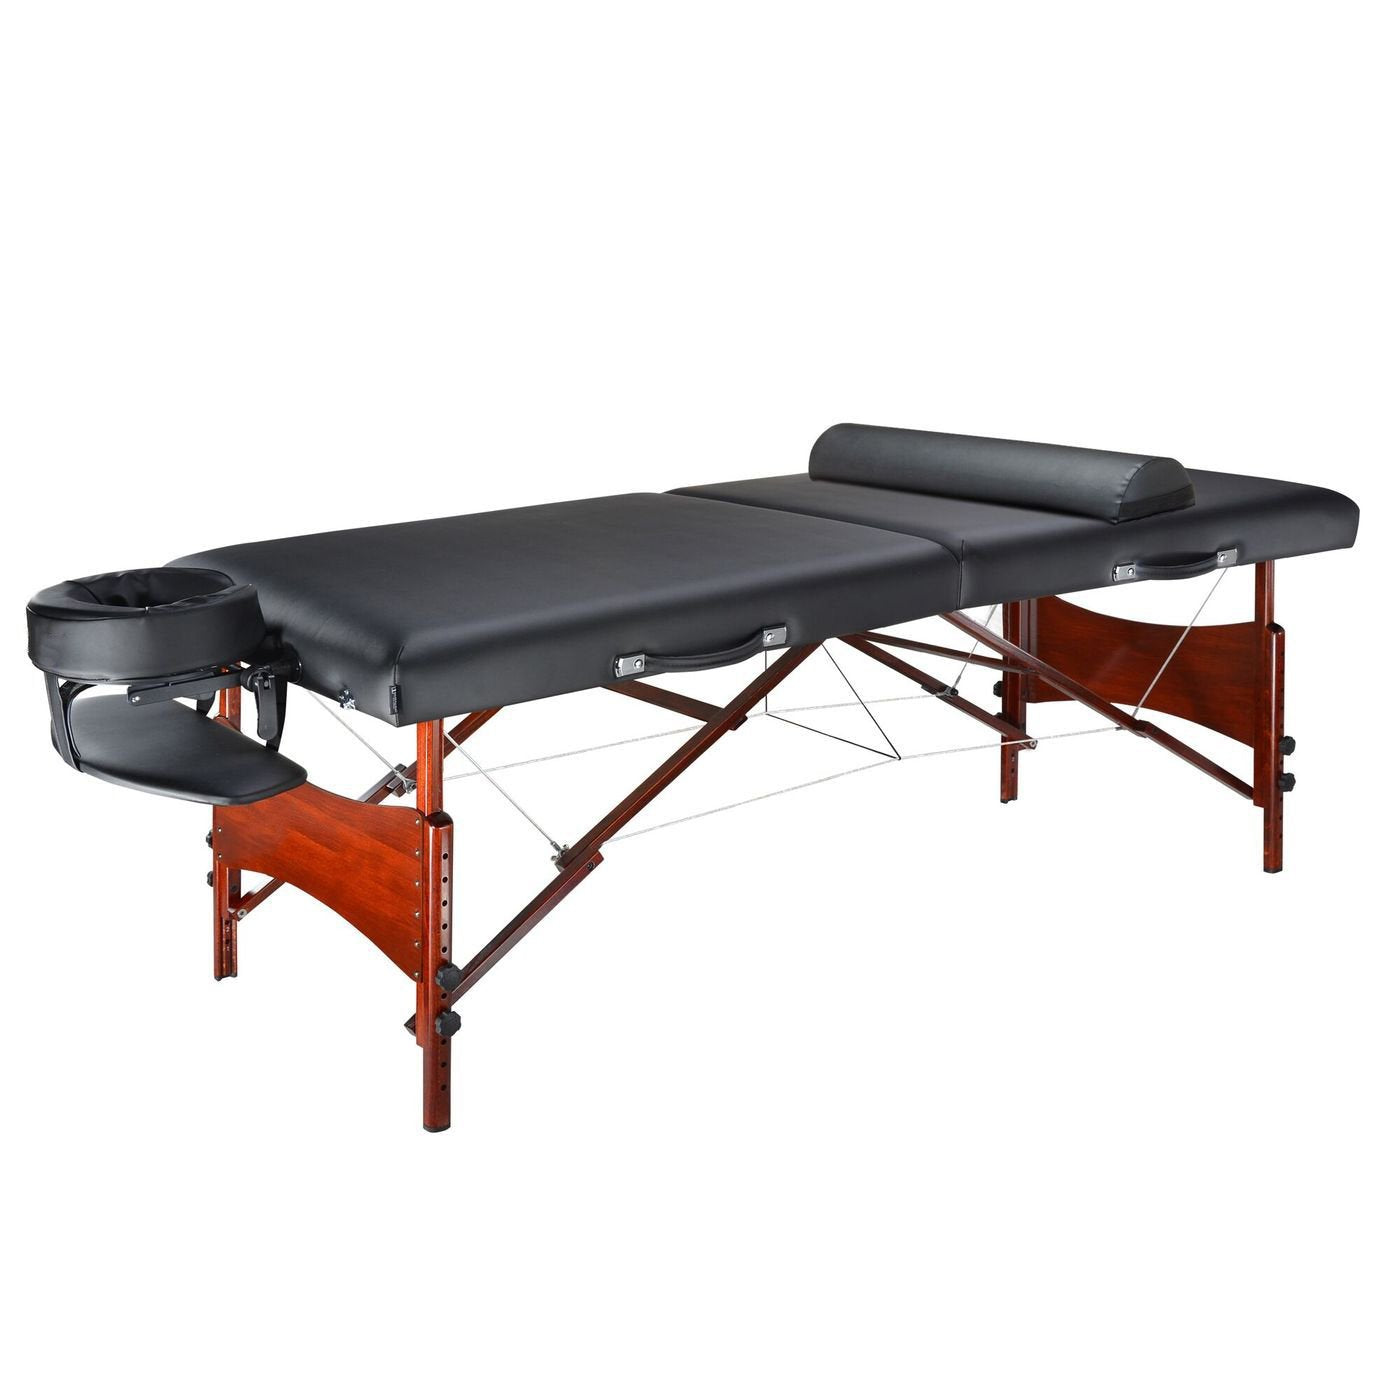 30" Roma II Portable Massage Table Deluxe Package